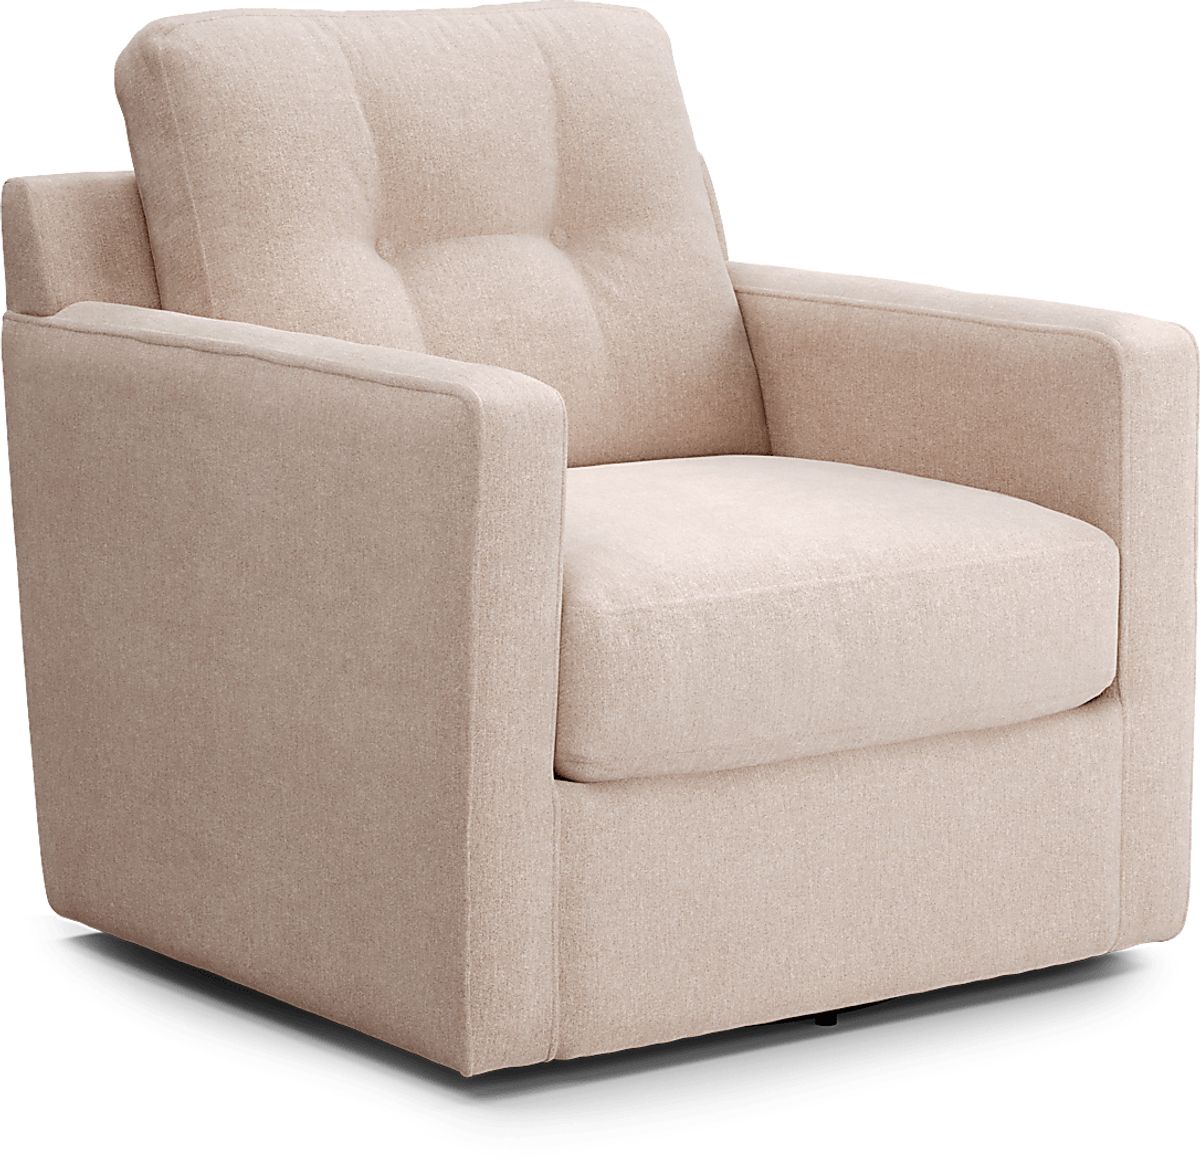 Drew & Jonathan Modularone Beige Chenille Fabric Accent Chair | Rooms to Go